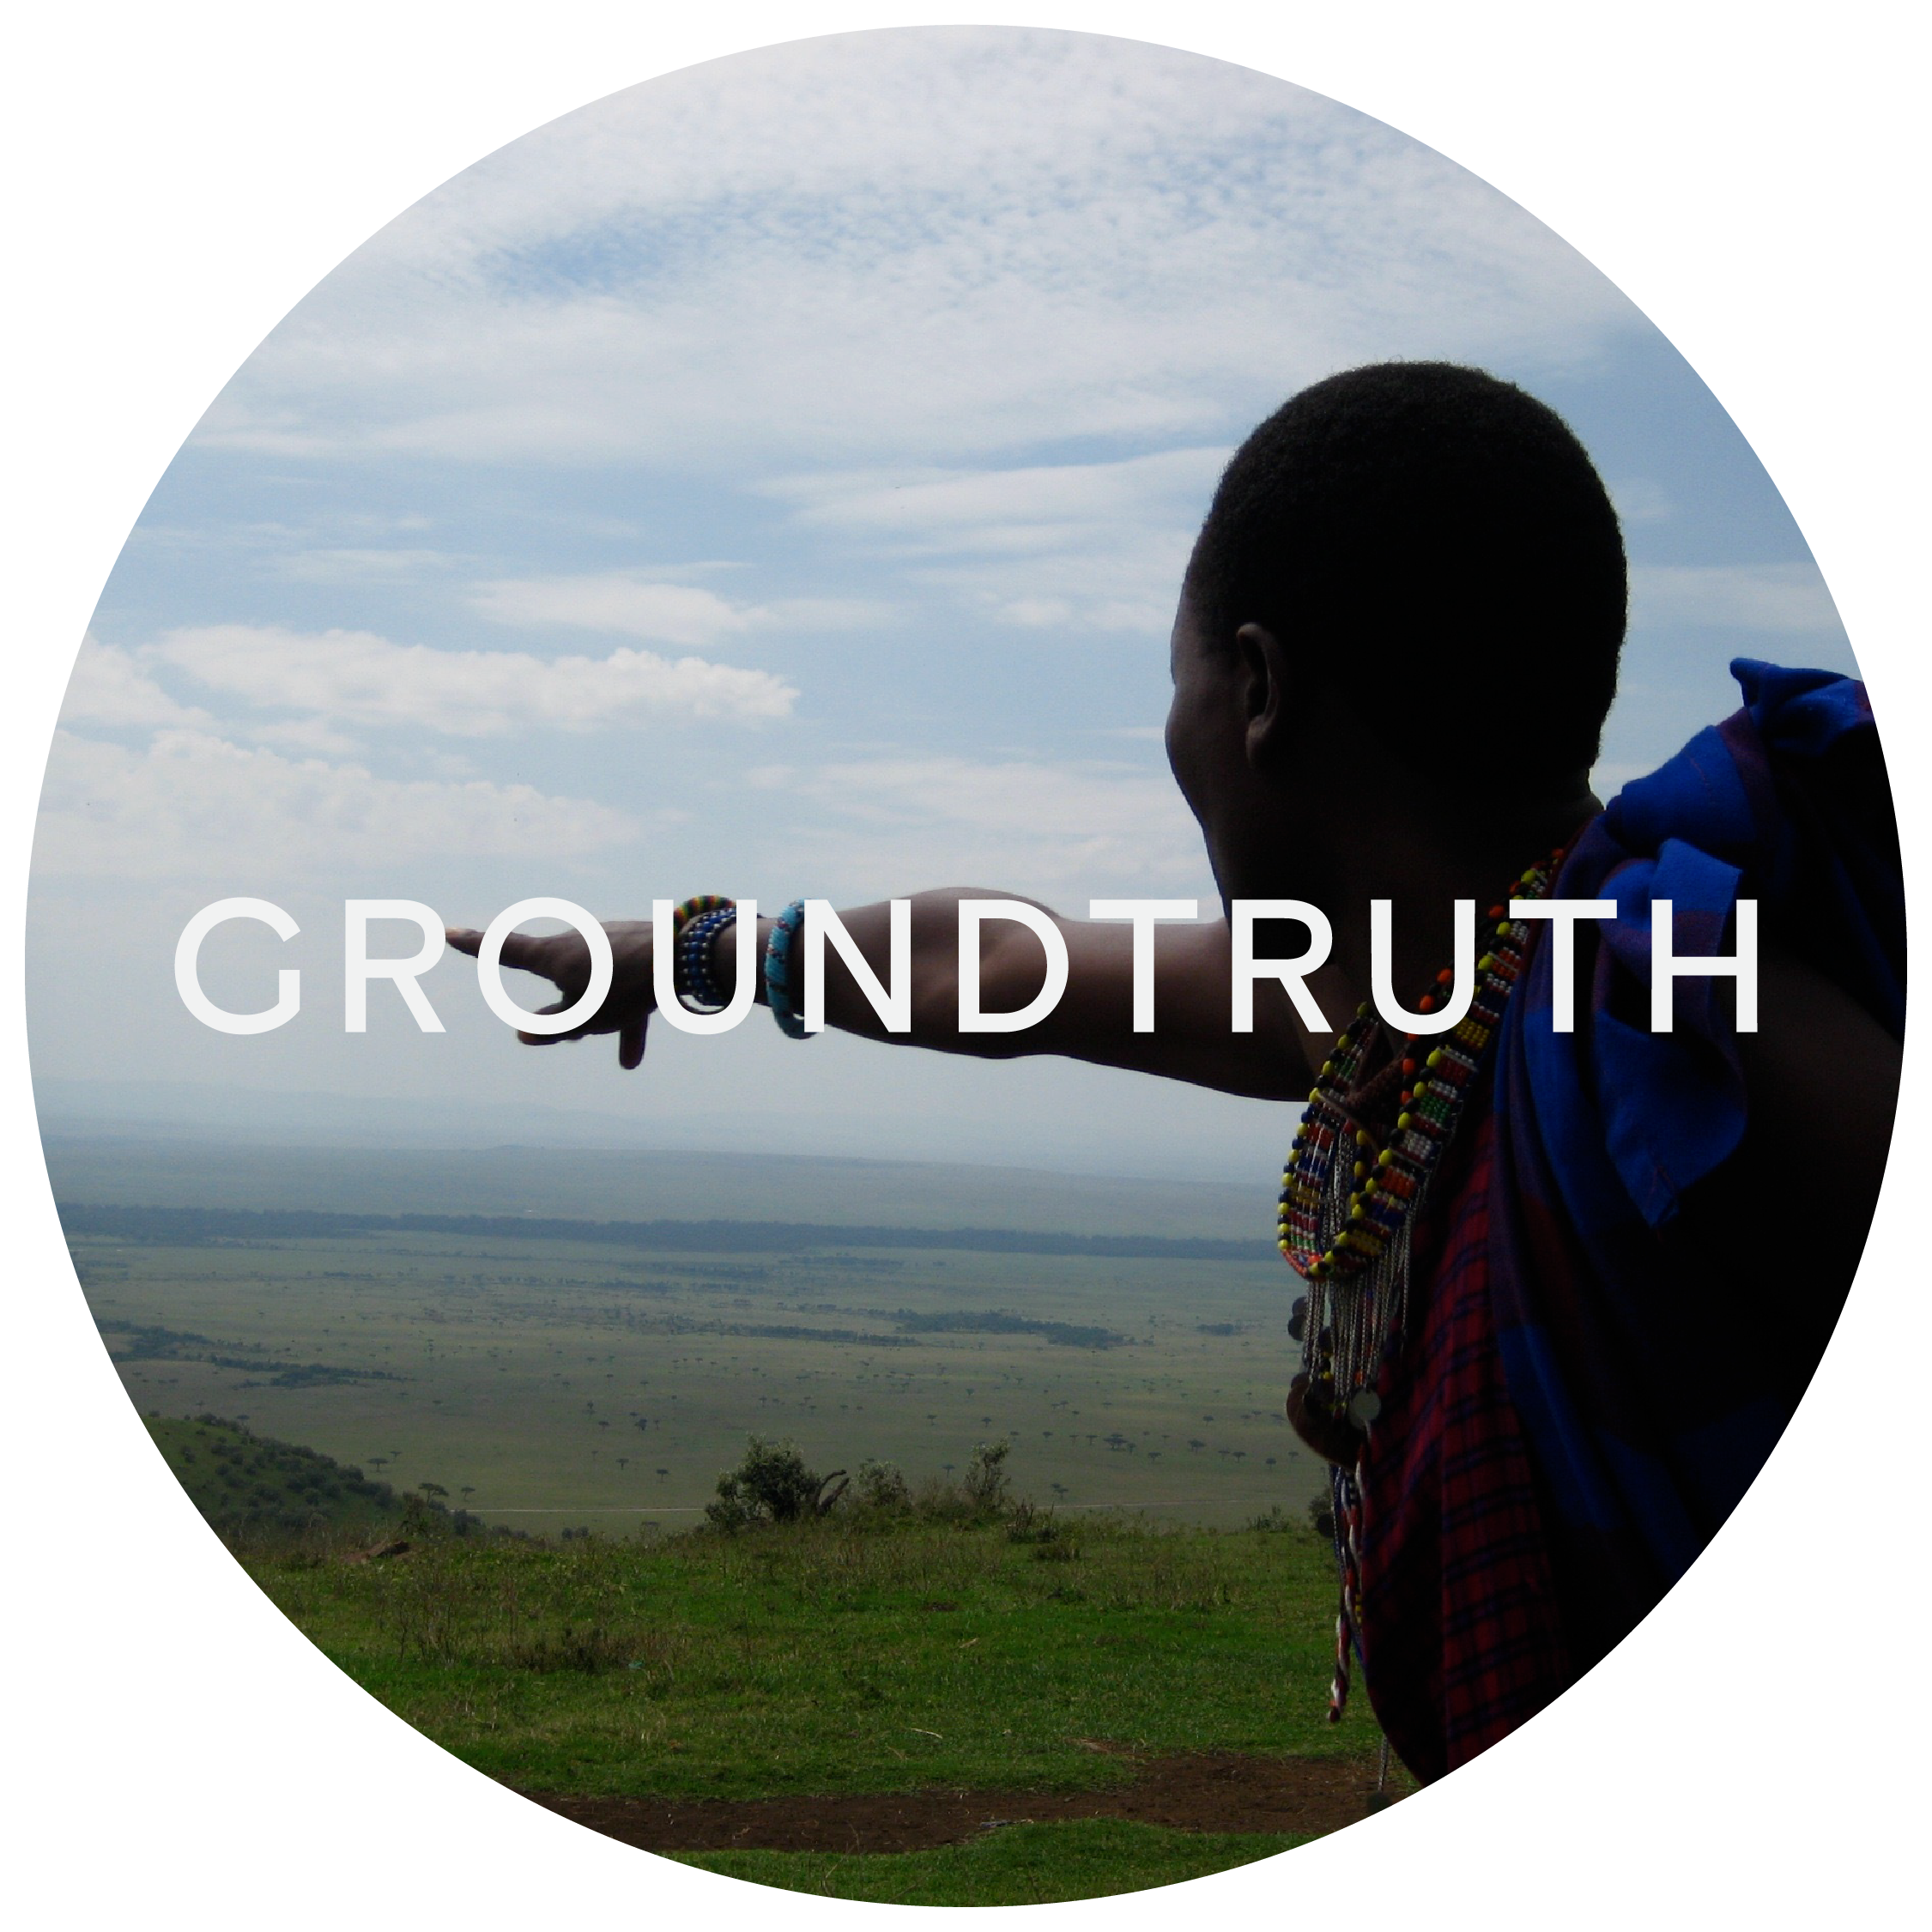 What does GROUNDTRUTH mean?